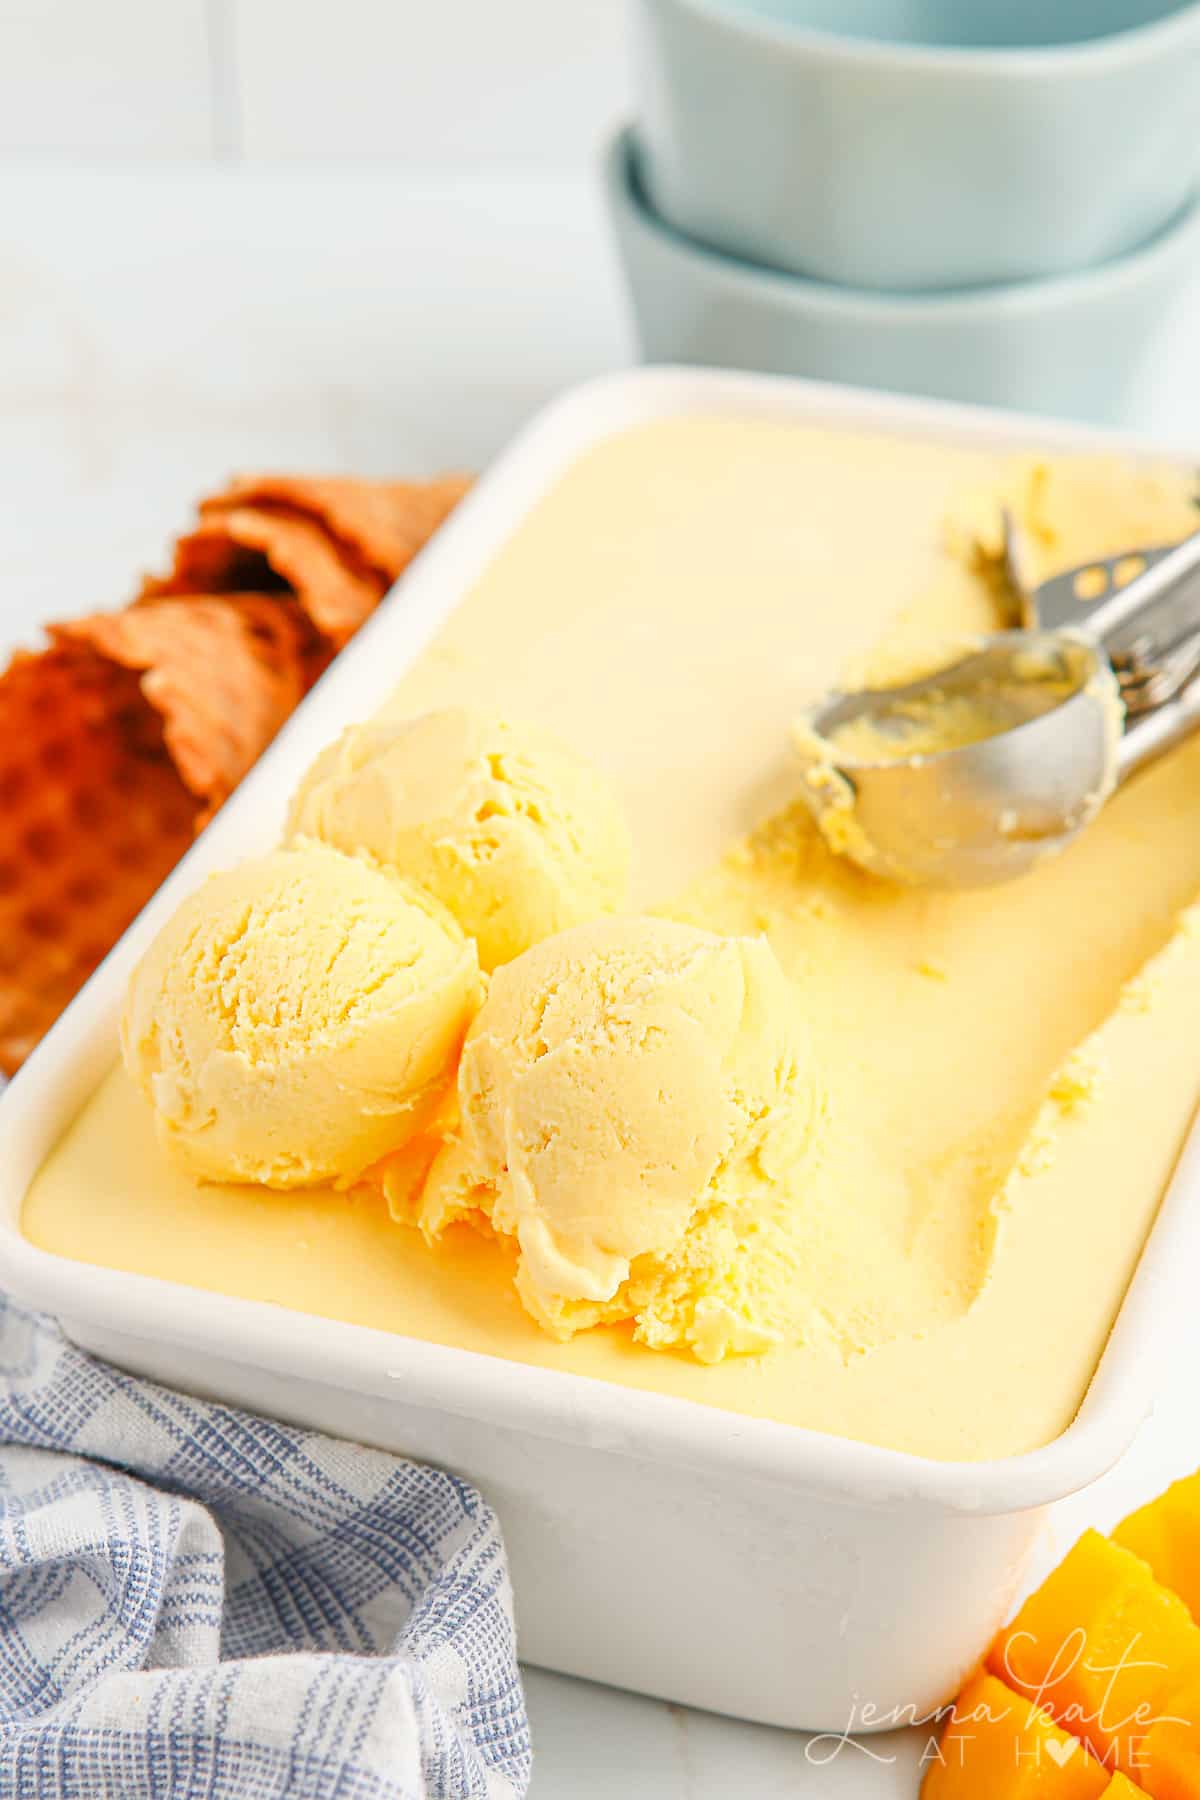 3 scoops of mango ice cream in a loaf pan filled with chilled ice cream